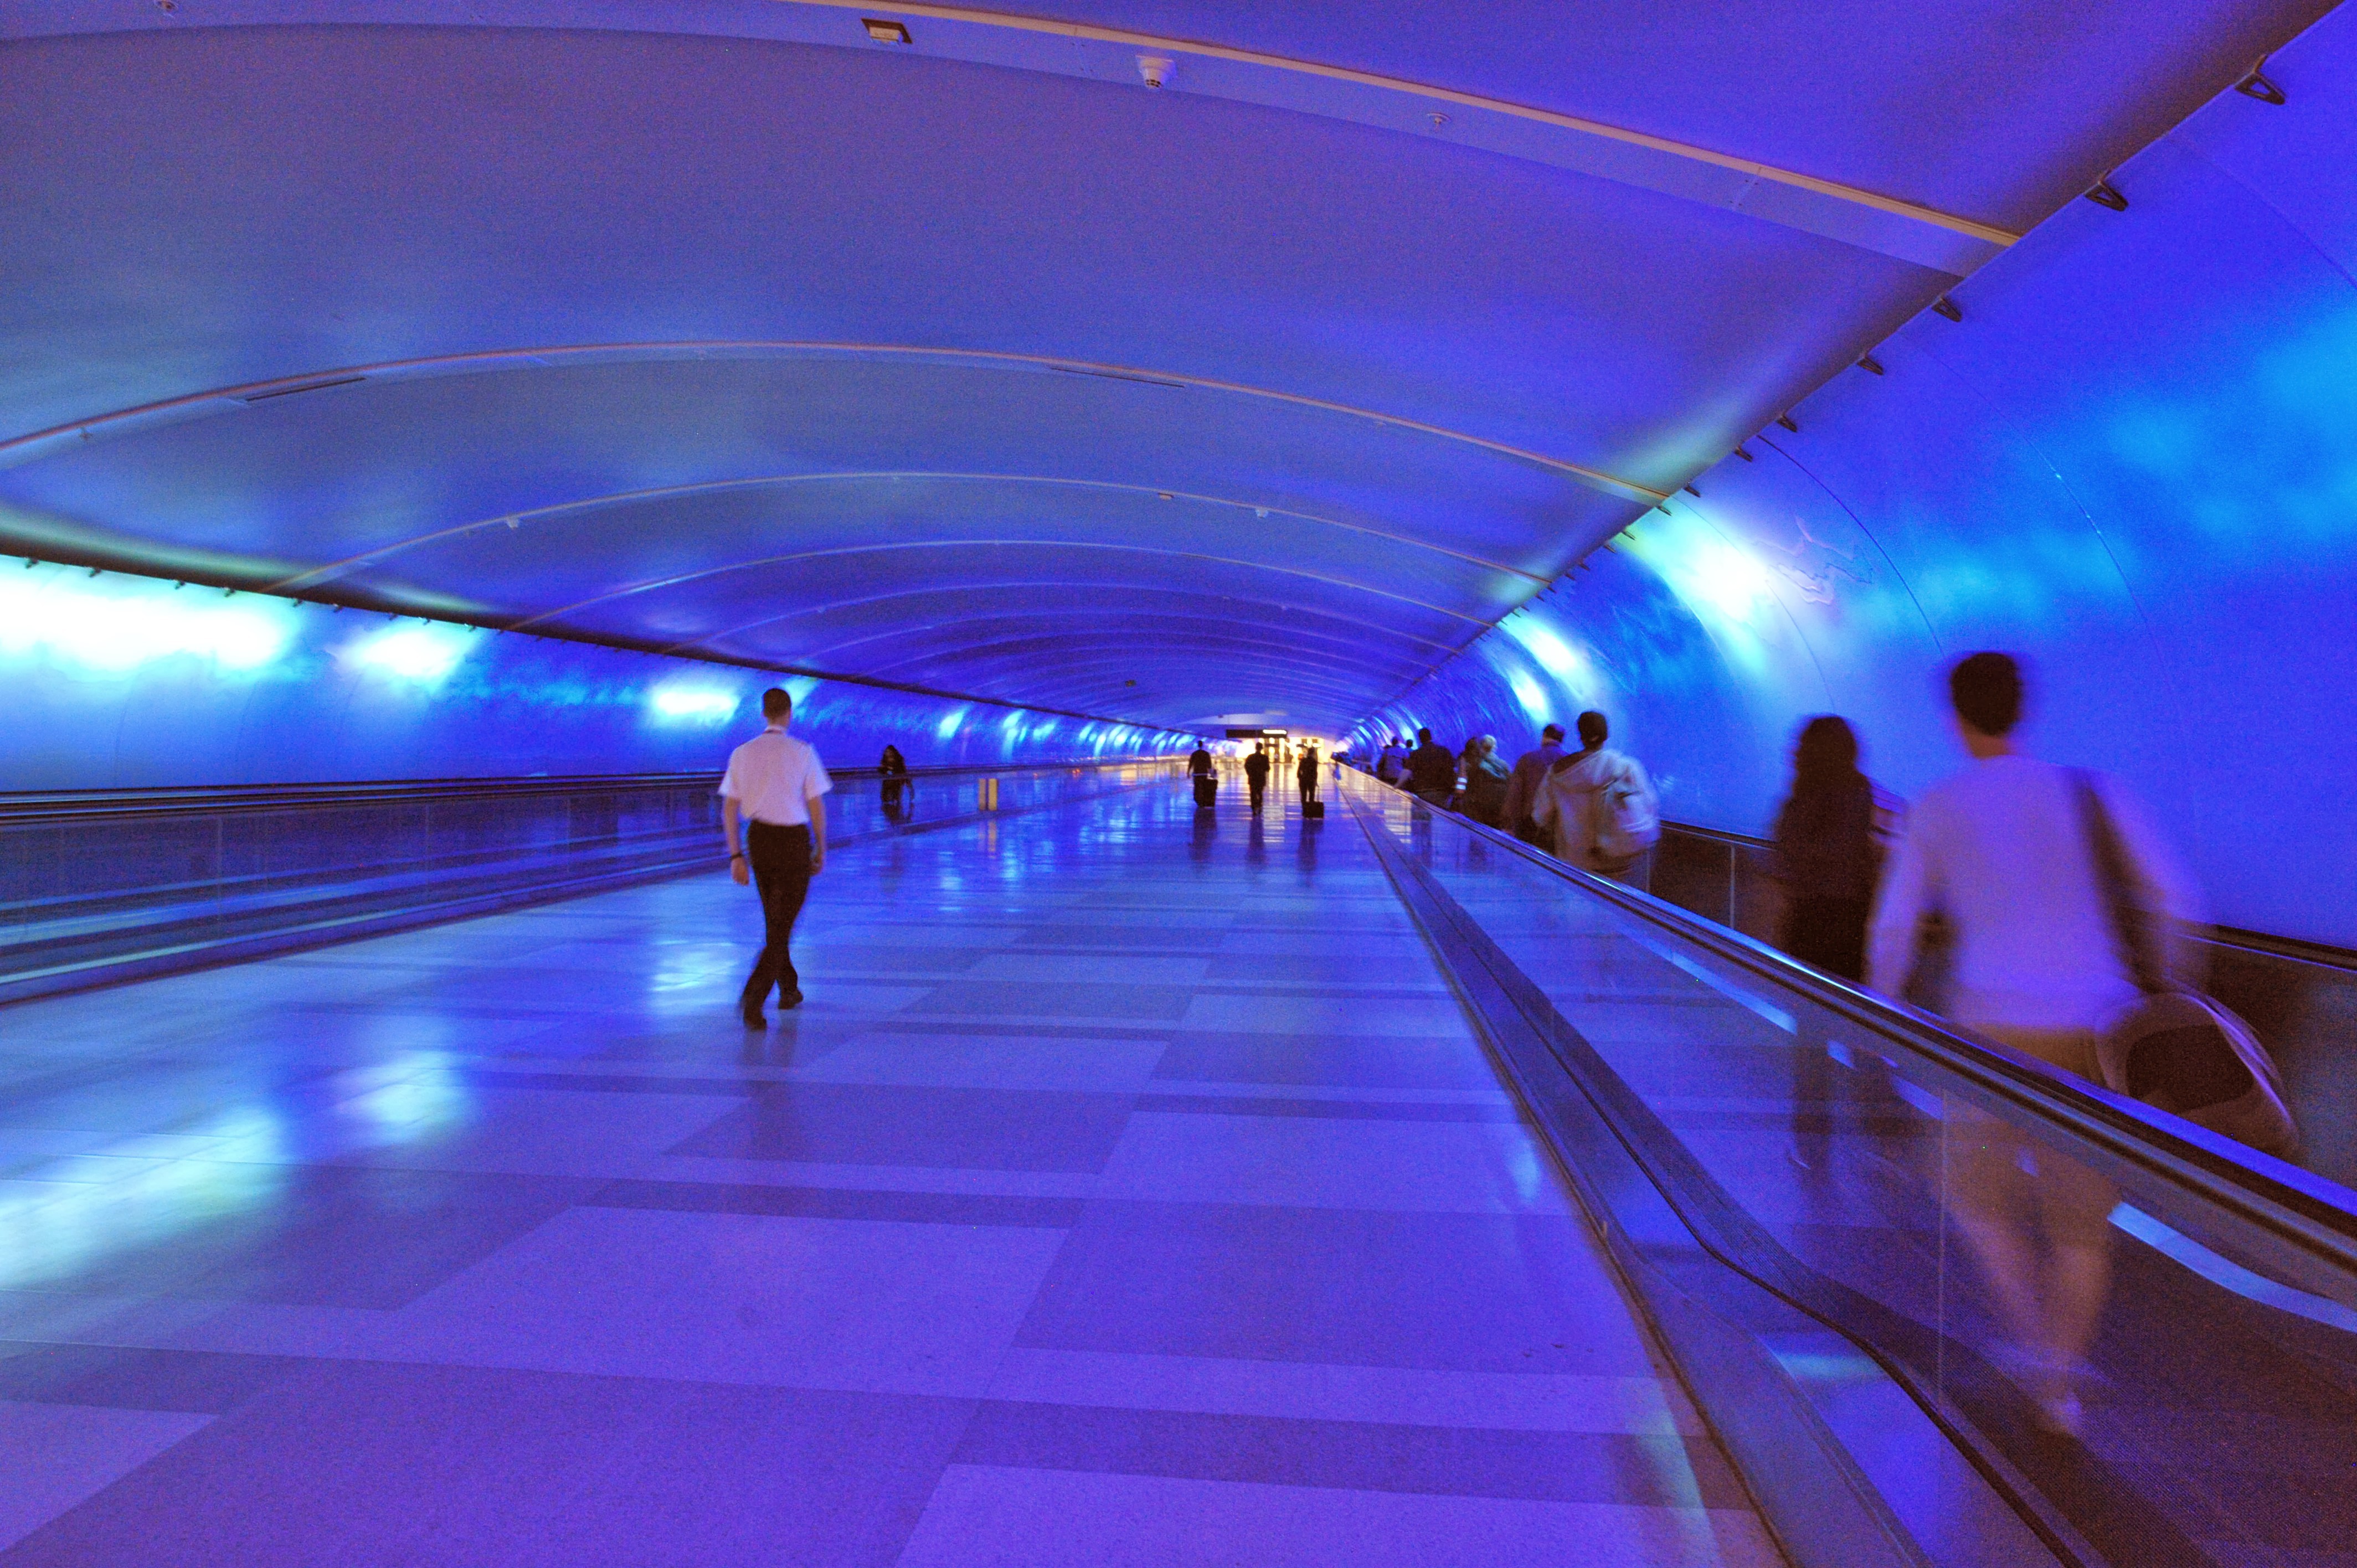 People pass through a tunnel at DTW that’s filled with purple light.